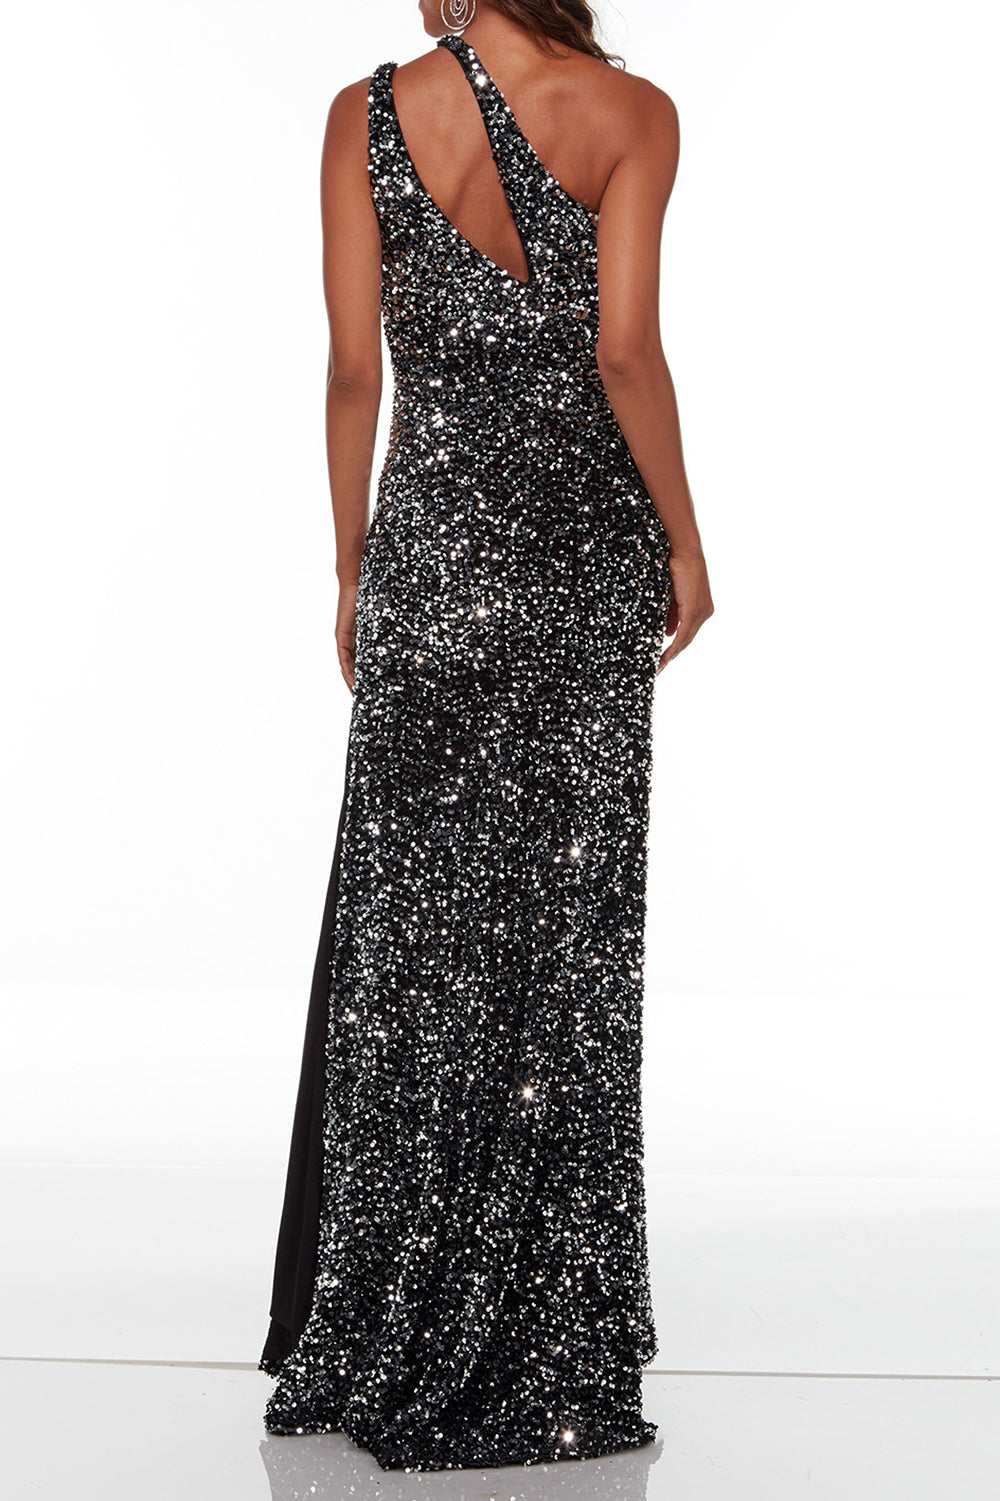 Stylish one-shoulder Sleeveless Floor-Length Prom Dress With Sequins